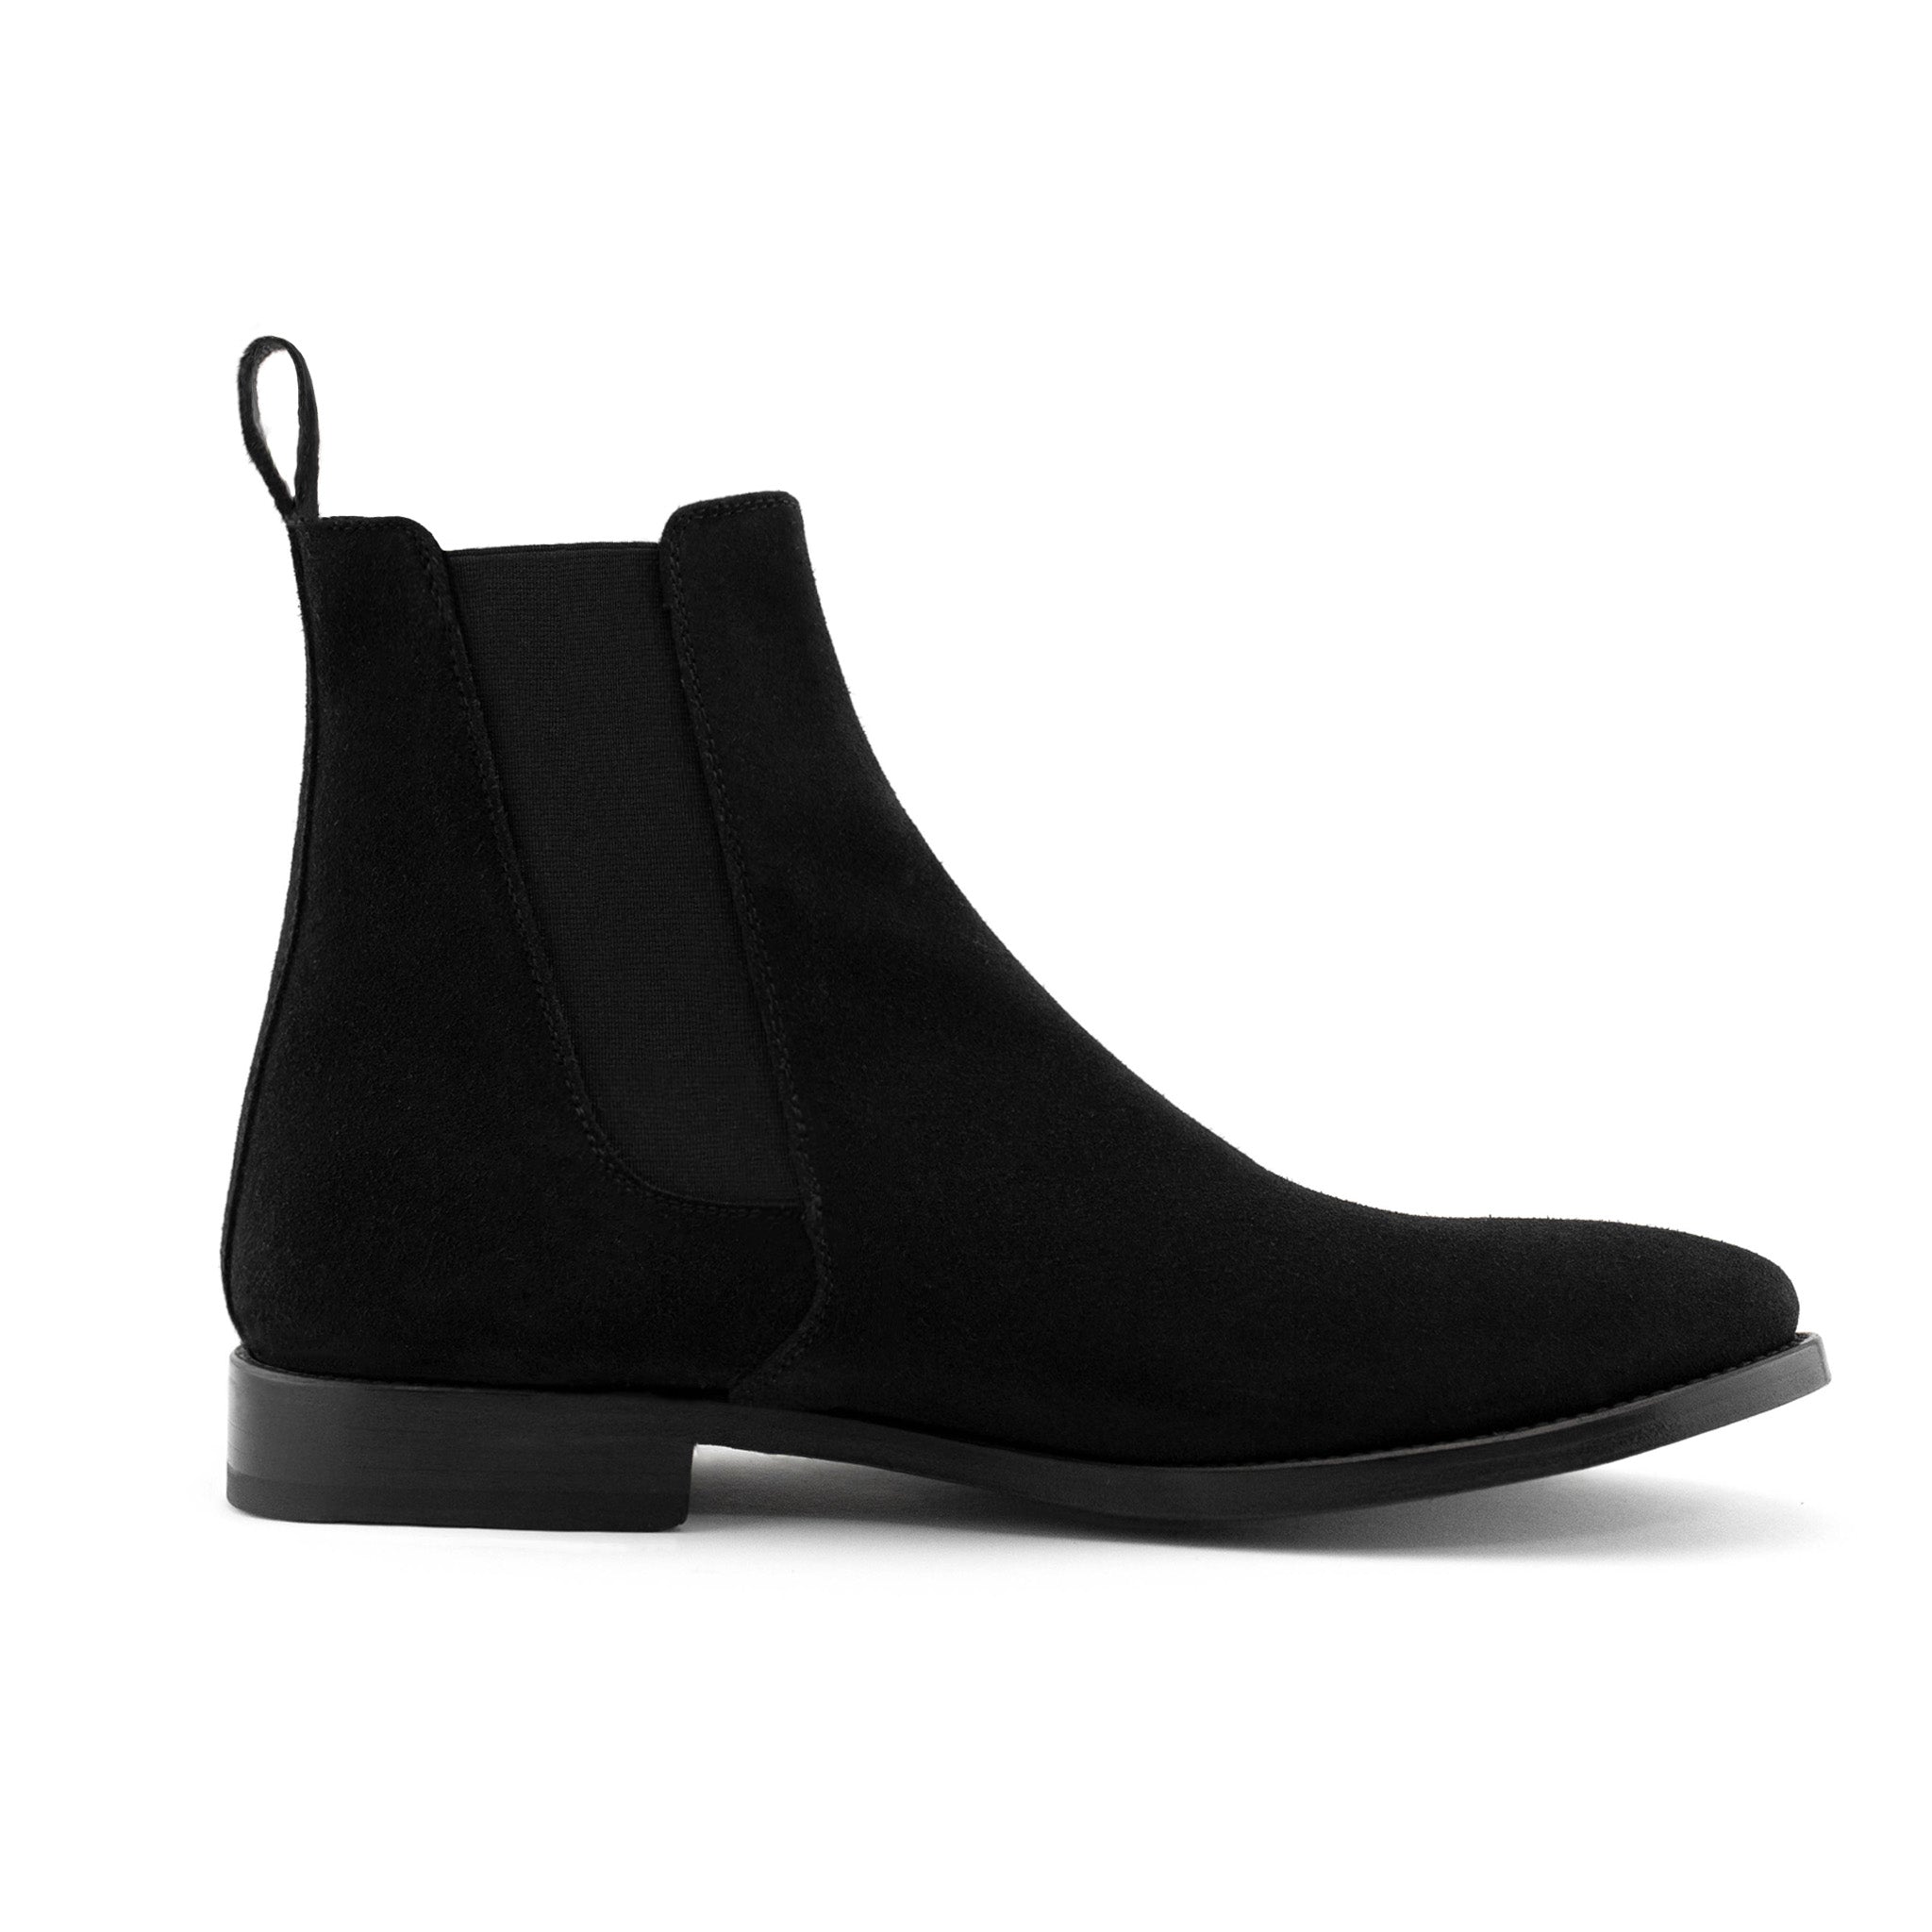 genstand præmedicinering mosaik THE CLASSIC BLACK CHELSEA BOOTS | ORO Los Angeles